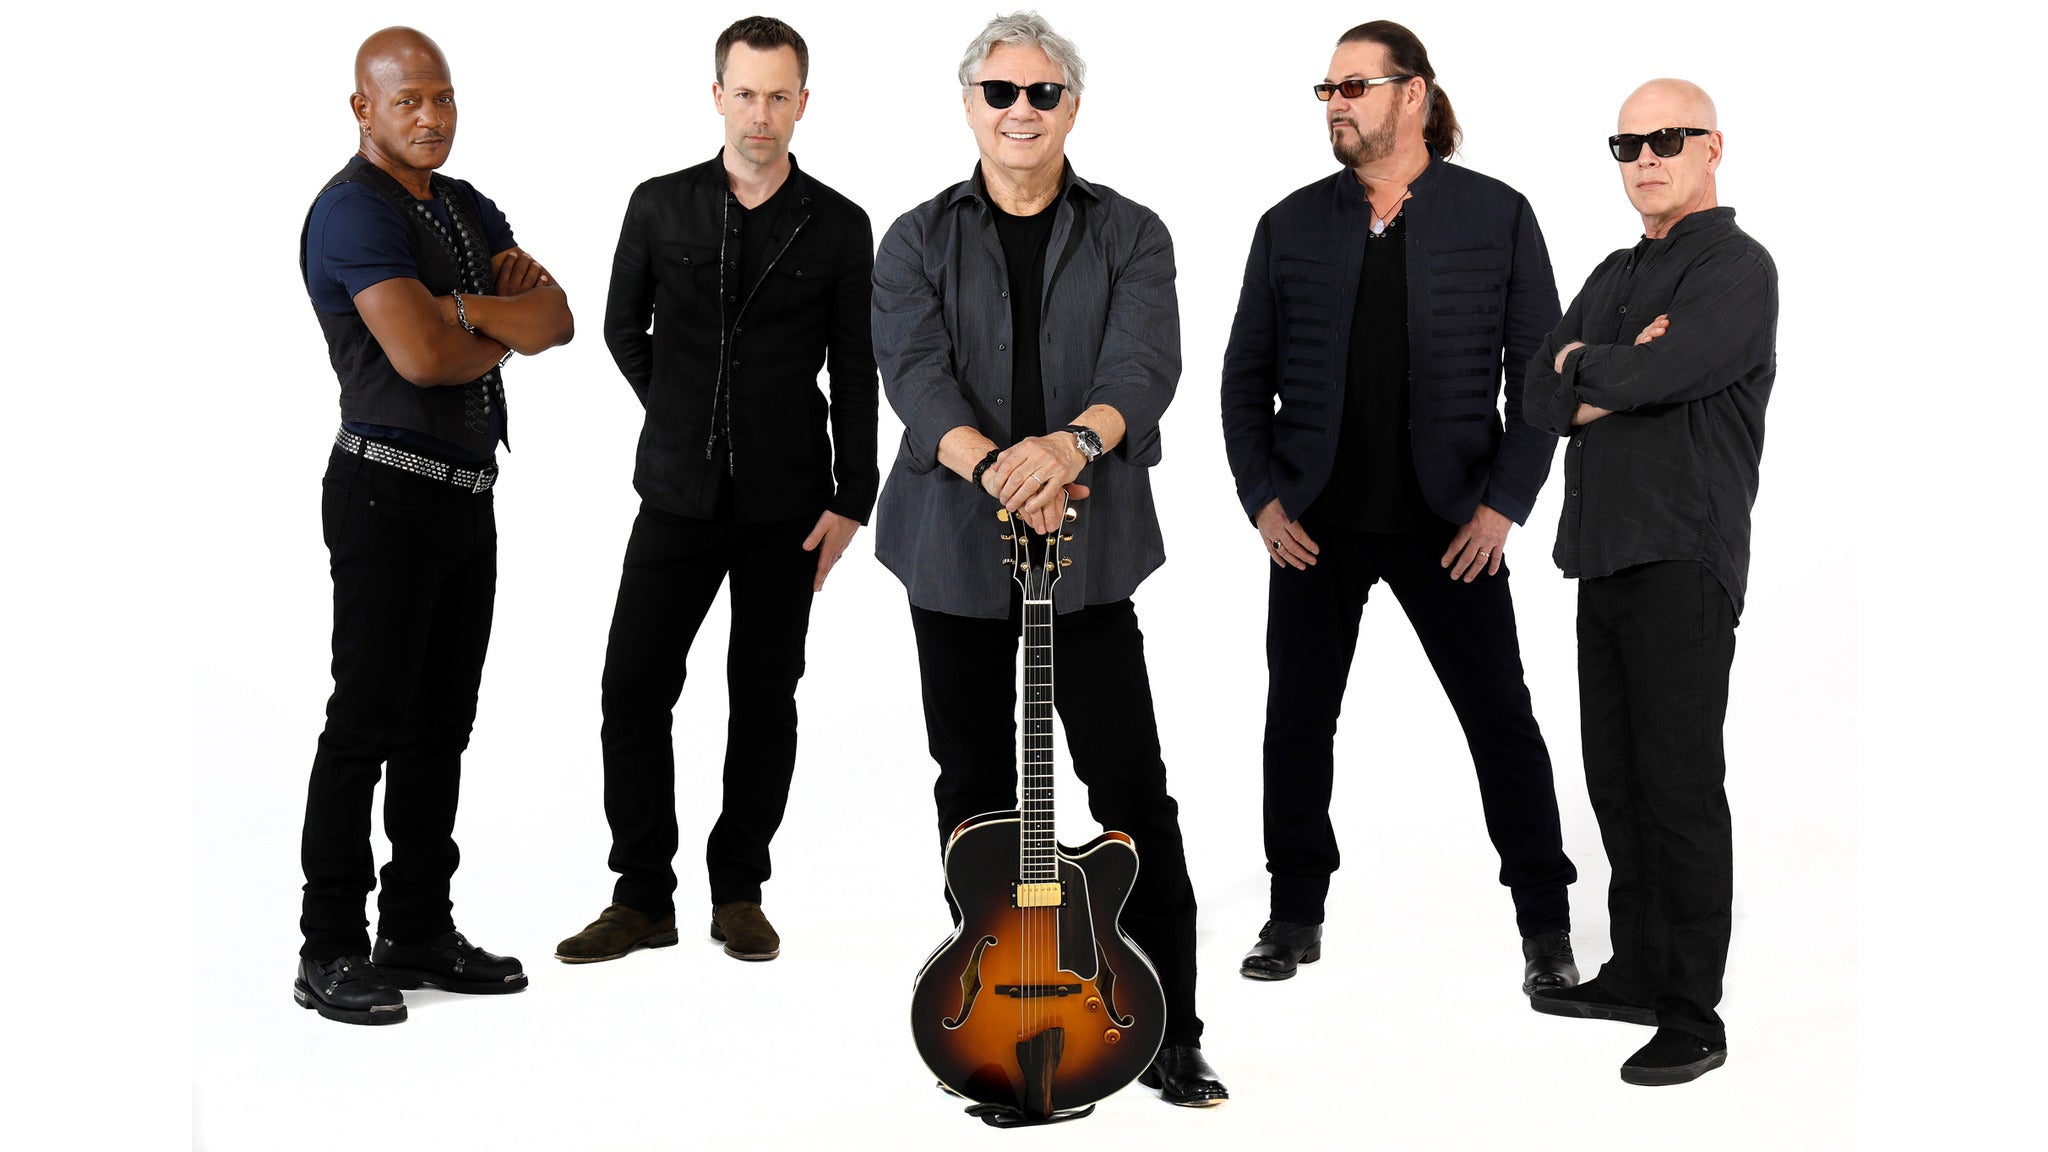 Steve Miller Band at The St. Augustine Amphitheatre